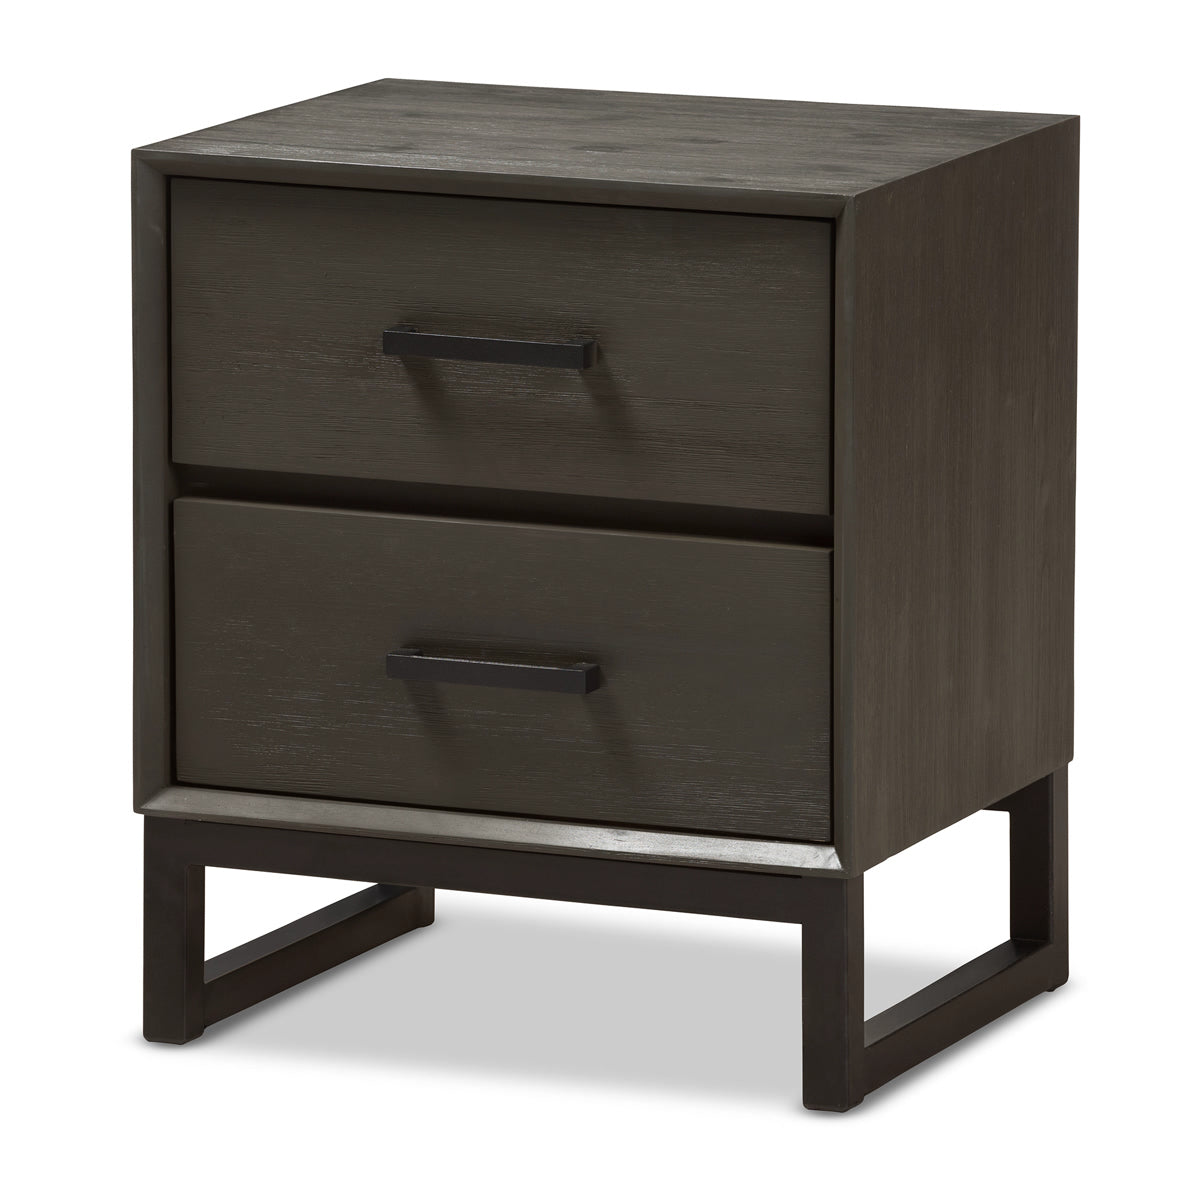 Baxton Studio Parris Rustic Grey Wood and Black Metal 2-Drawer Nightstand Baxton Studio-nightstands-Minimal And Modern - 1